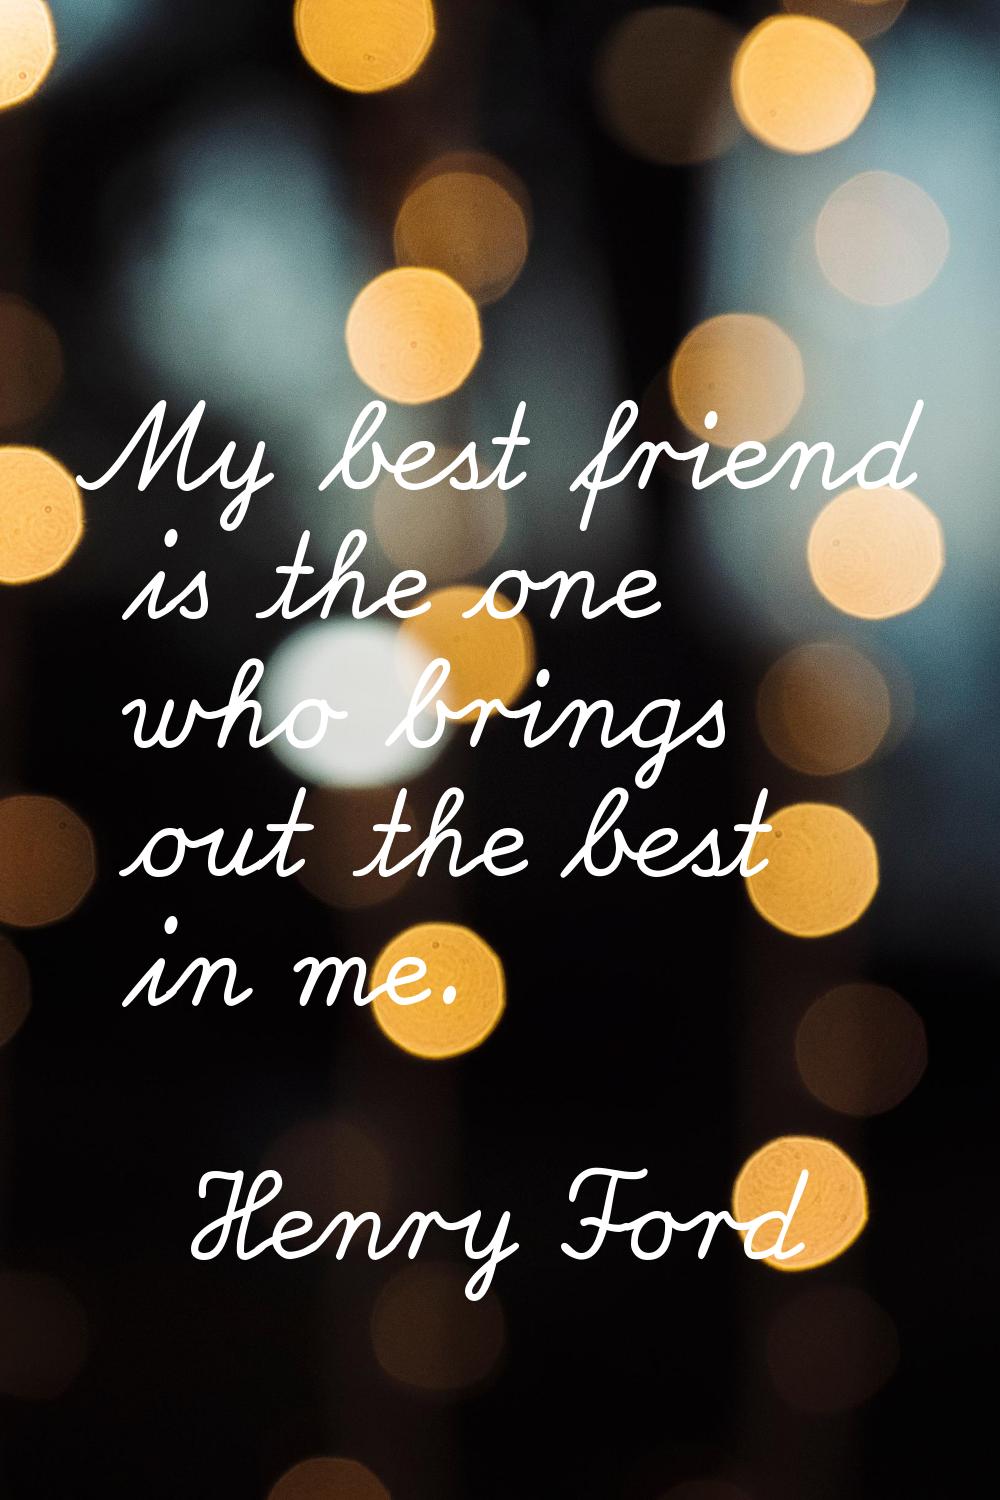 My best friend is the one who brings out the best in me.